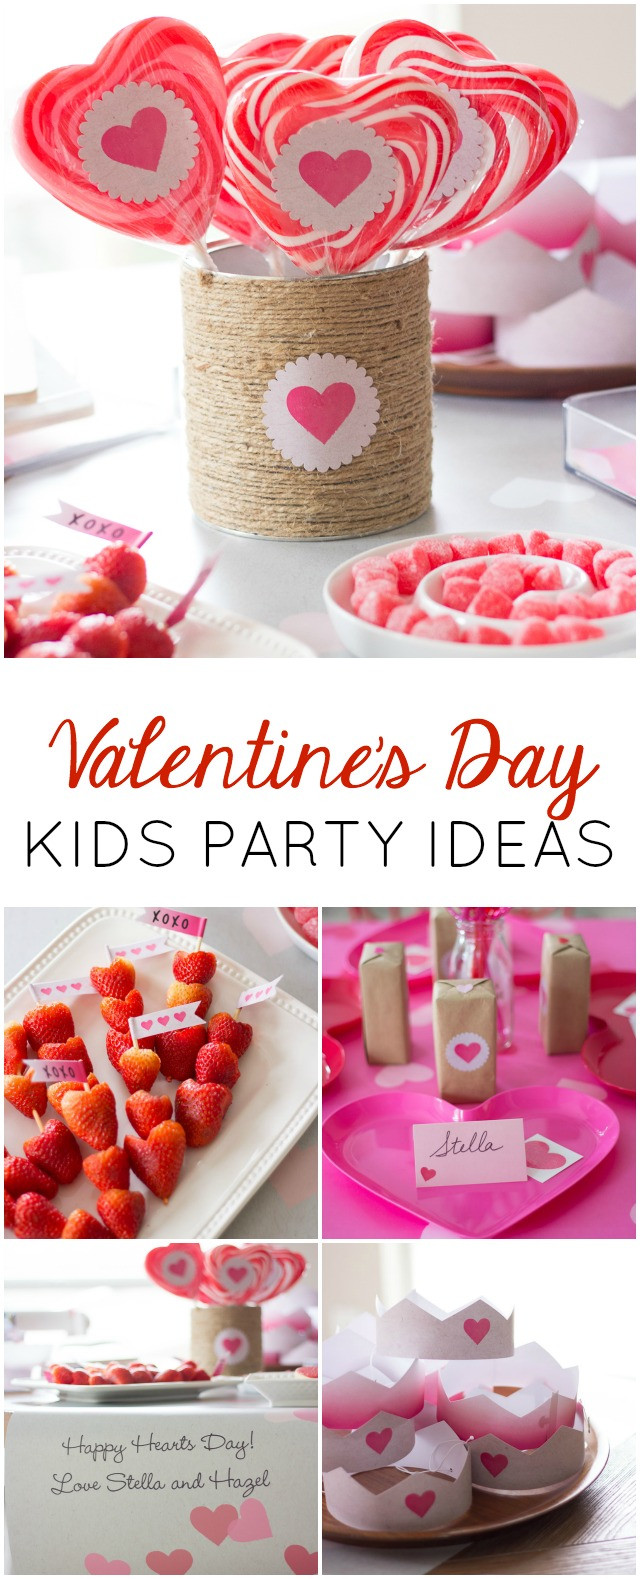 Valentines Birthday Gift Ideas
 A Heart Filled Valentines Party Design Improvised